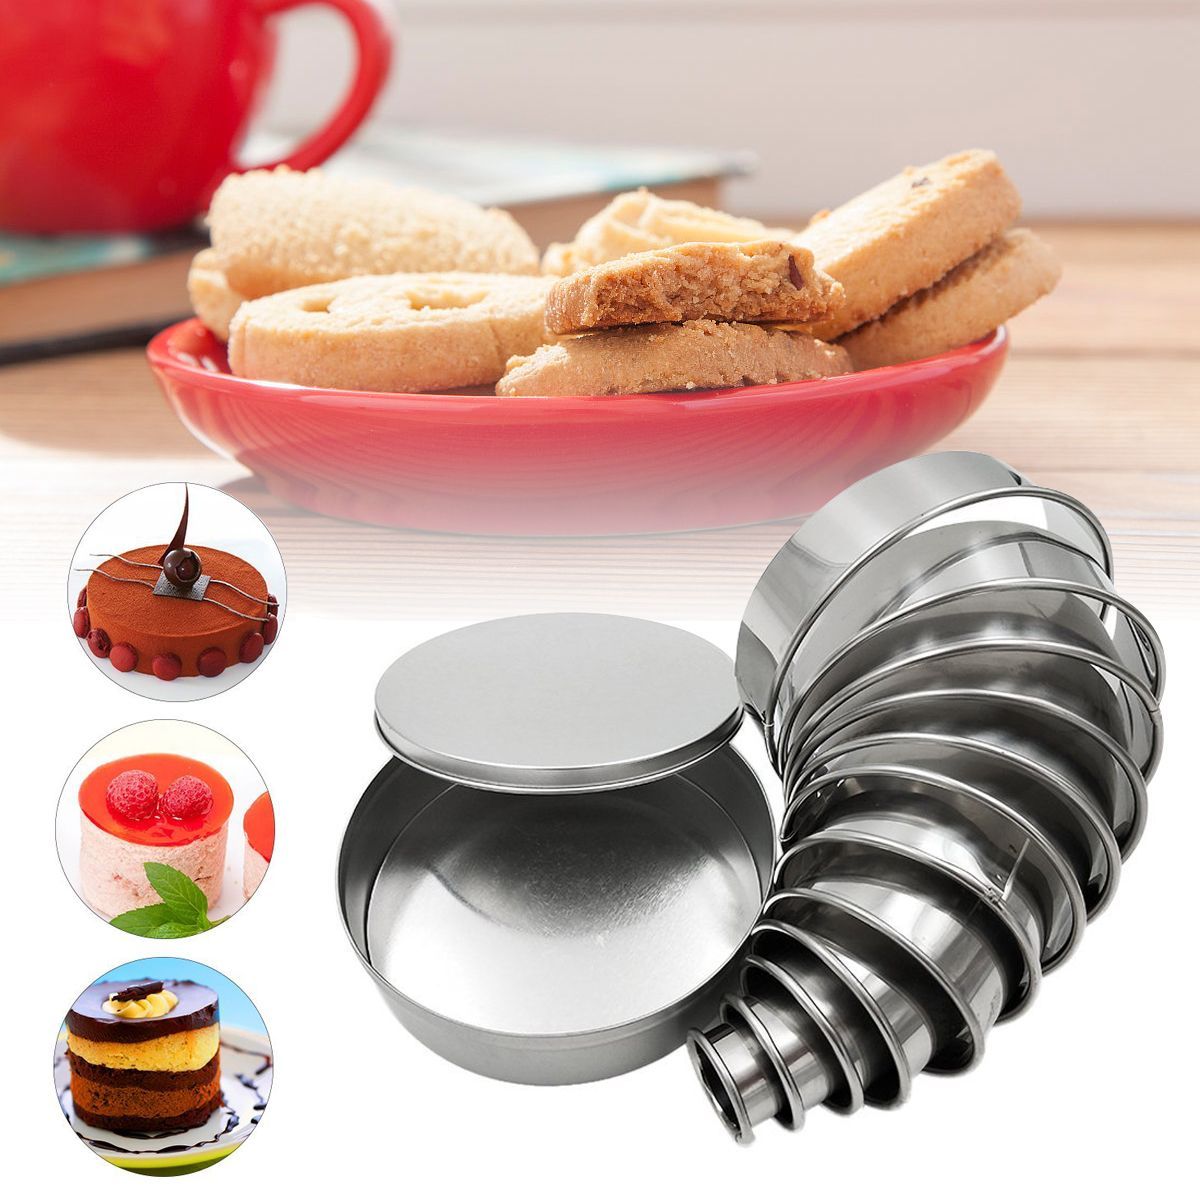 12Pcs-DIY-Round-Stainless-Steel-Mousse-Circle-Ring-Molds-Cake-Cookie-Pastry-Baking-Cutter-Mould-Set-1384374